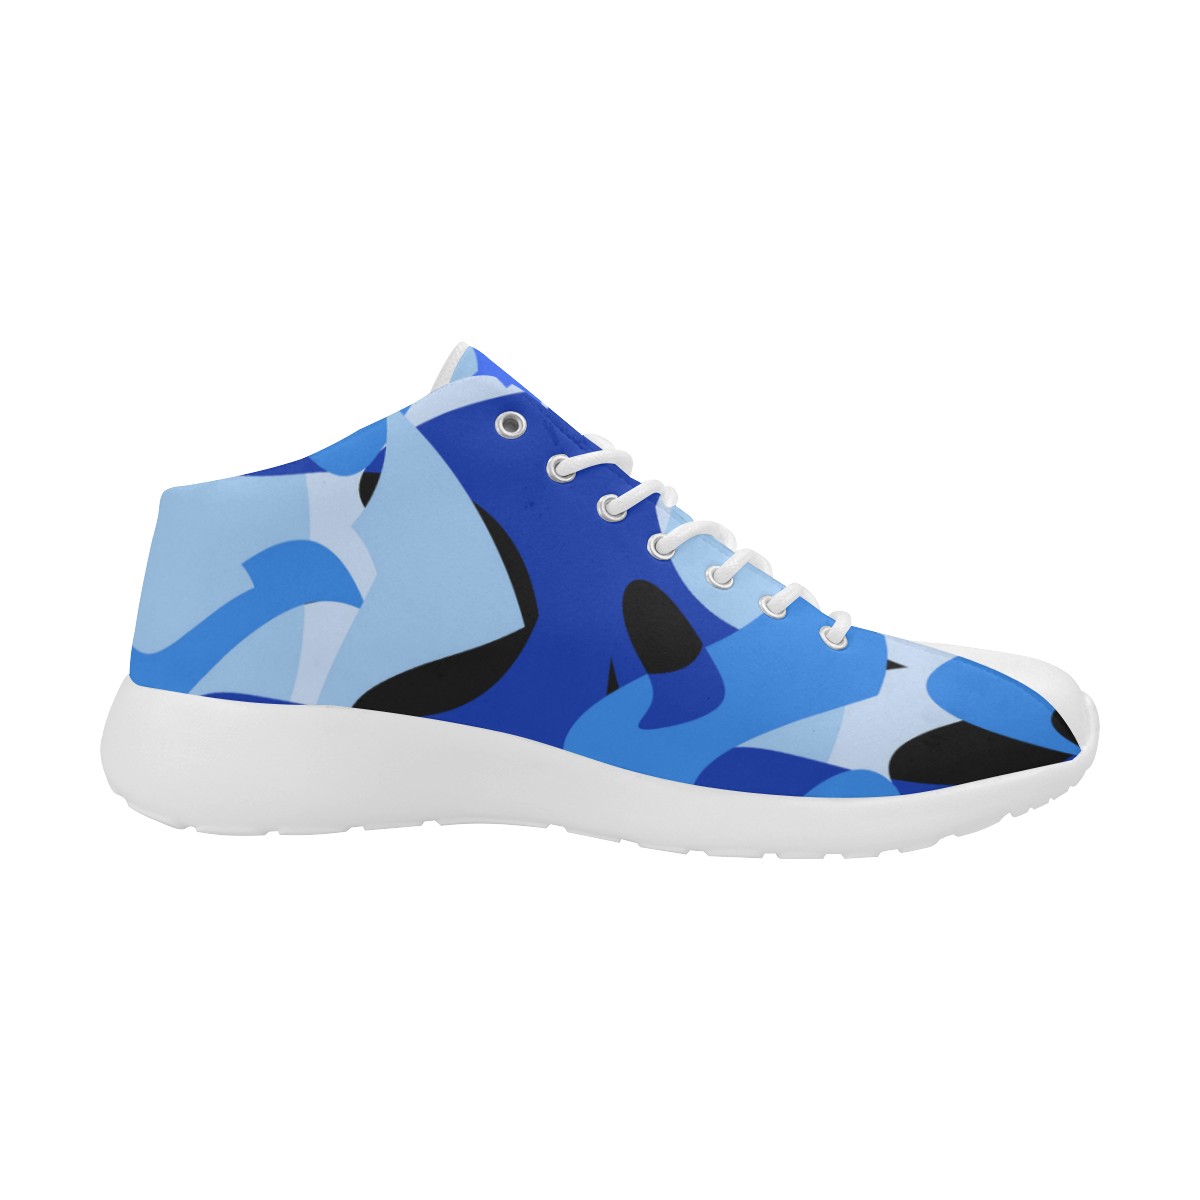 Camouflage Abstract Blue and Black Women's Basketball Training Shoes (Model 47502)